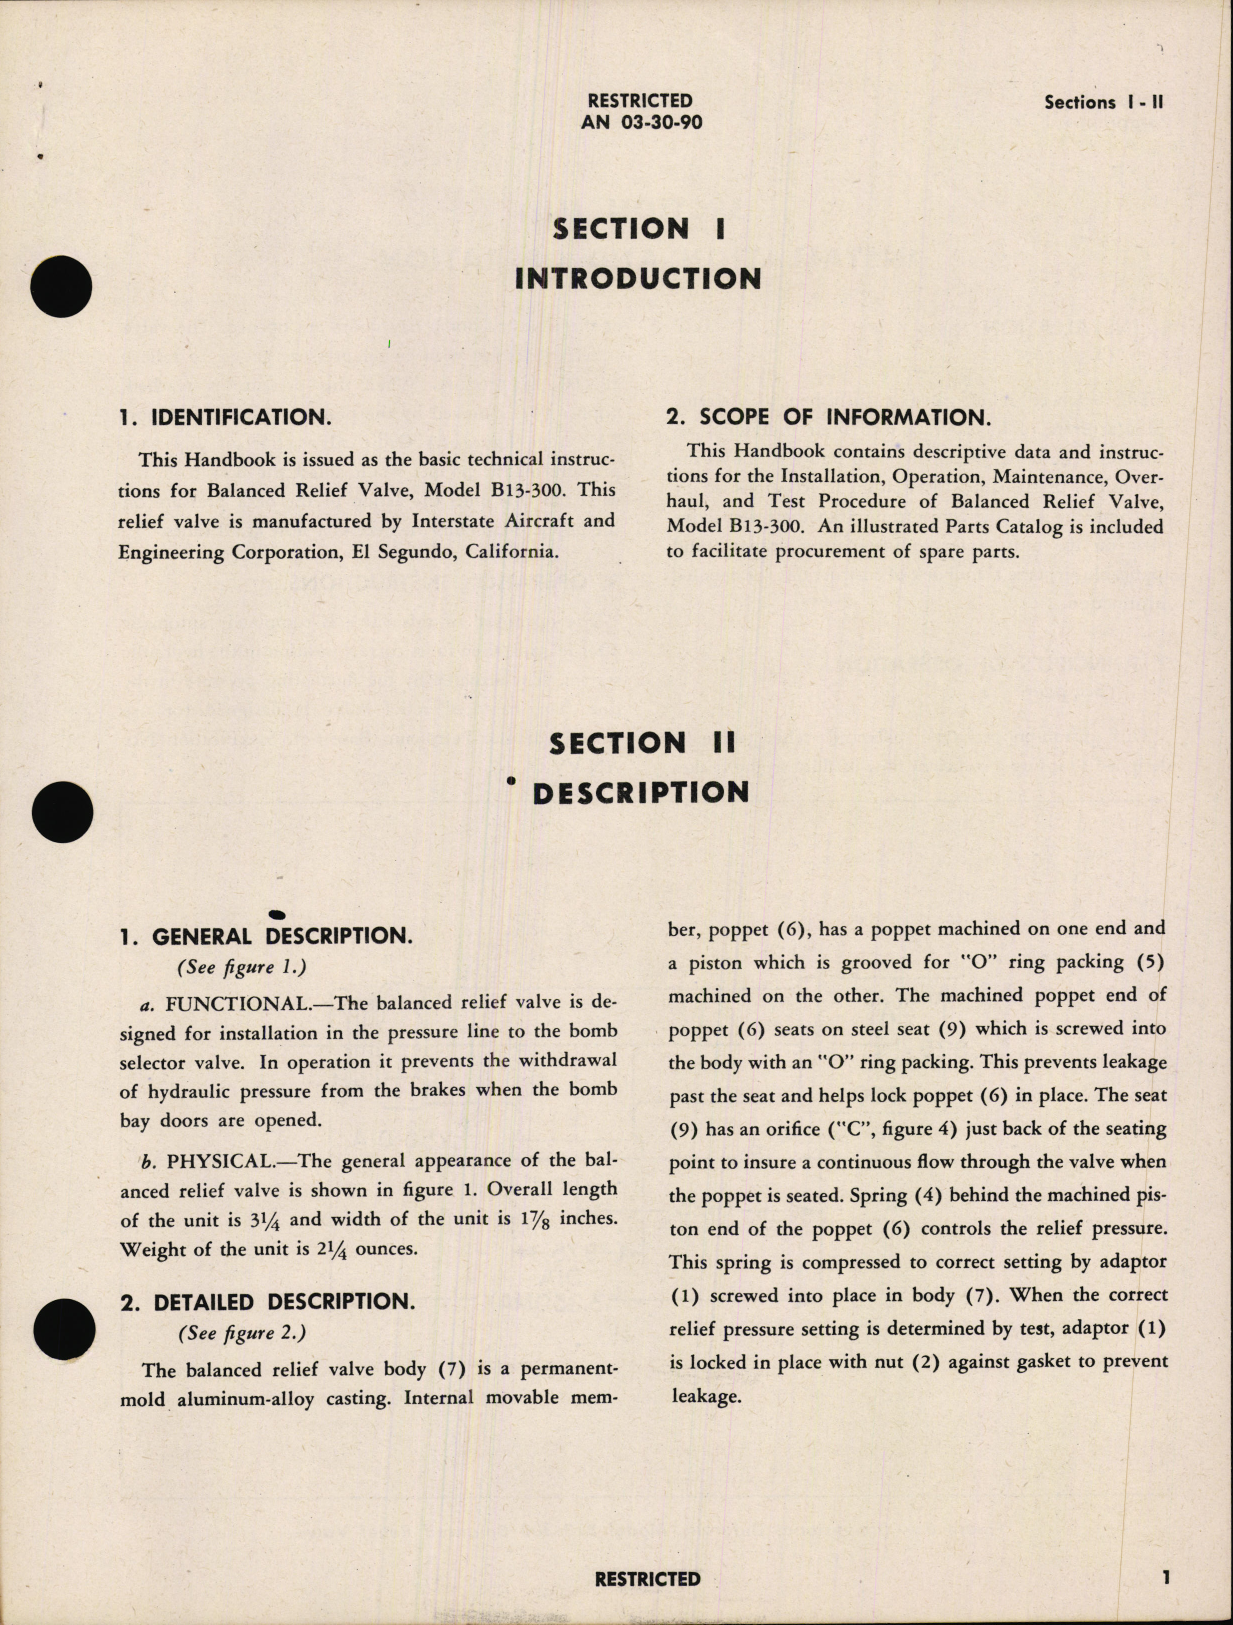 Sample page 5 from AirCorps Library document: Handbook of Instructions with Parts Catalog for Model B13-300 Balanced Relief Valve